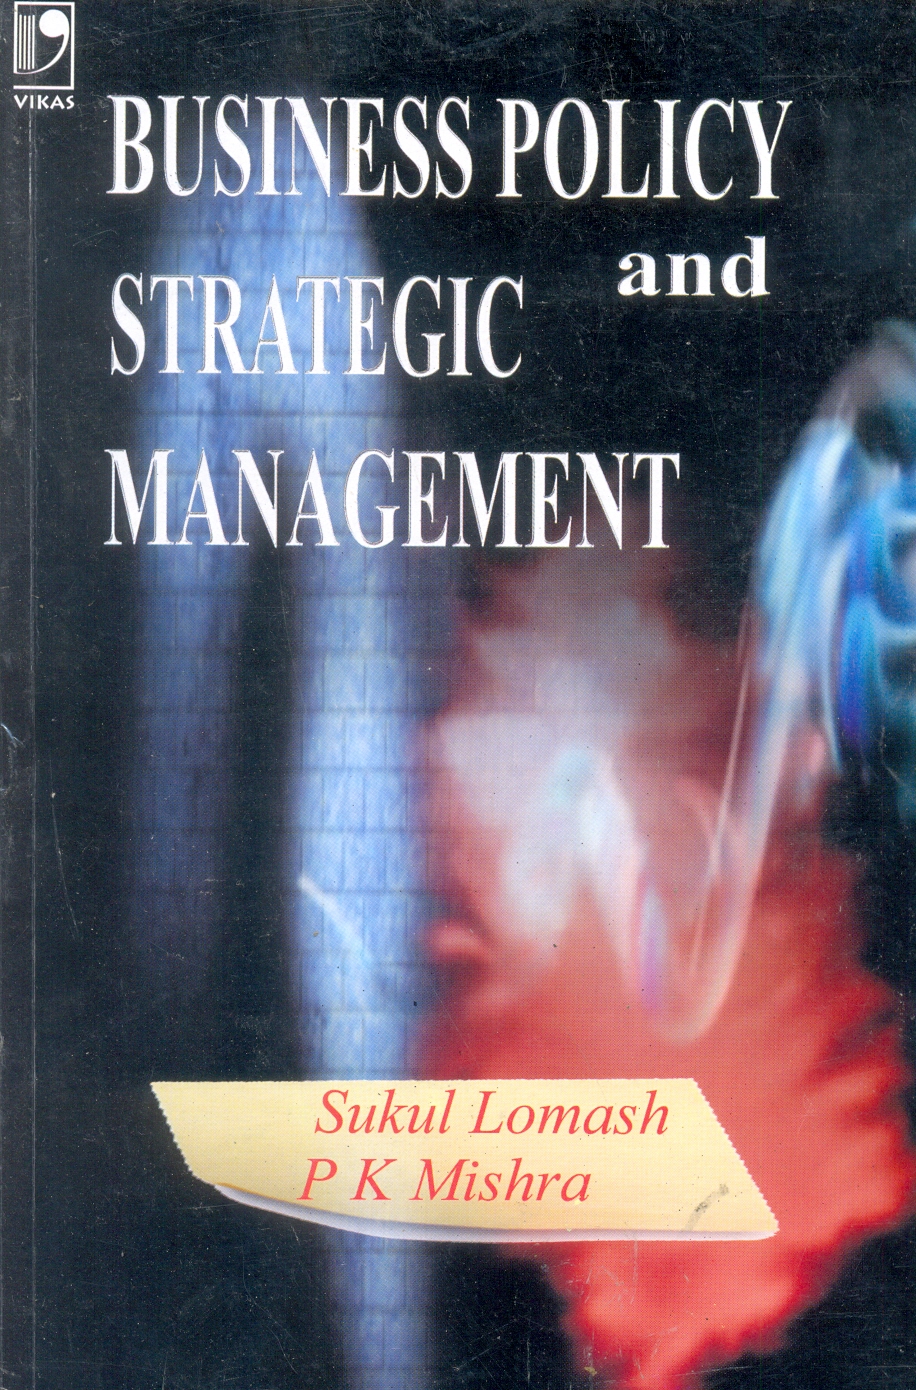 article review on business policy and strategic management pdf